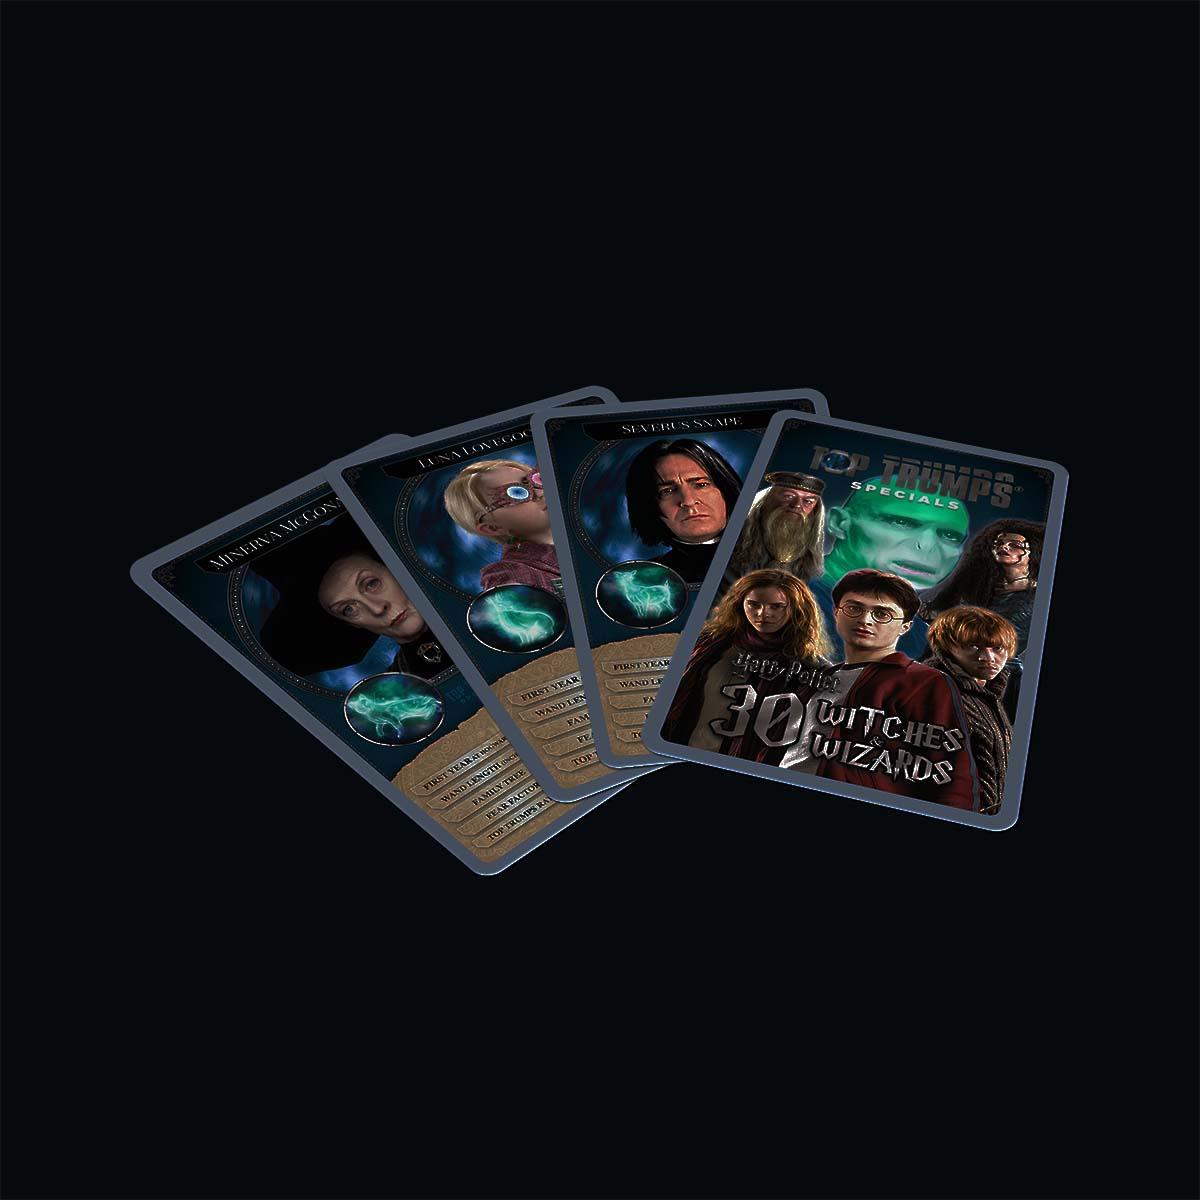 Harry Potter 30 Witches & Wizards Card Game Collectors Tin